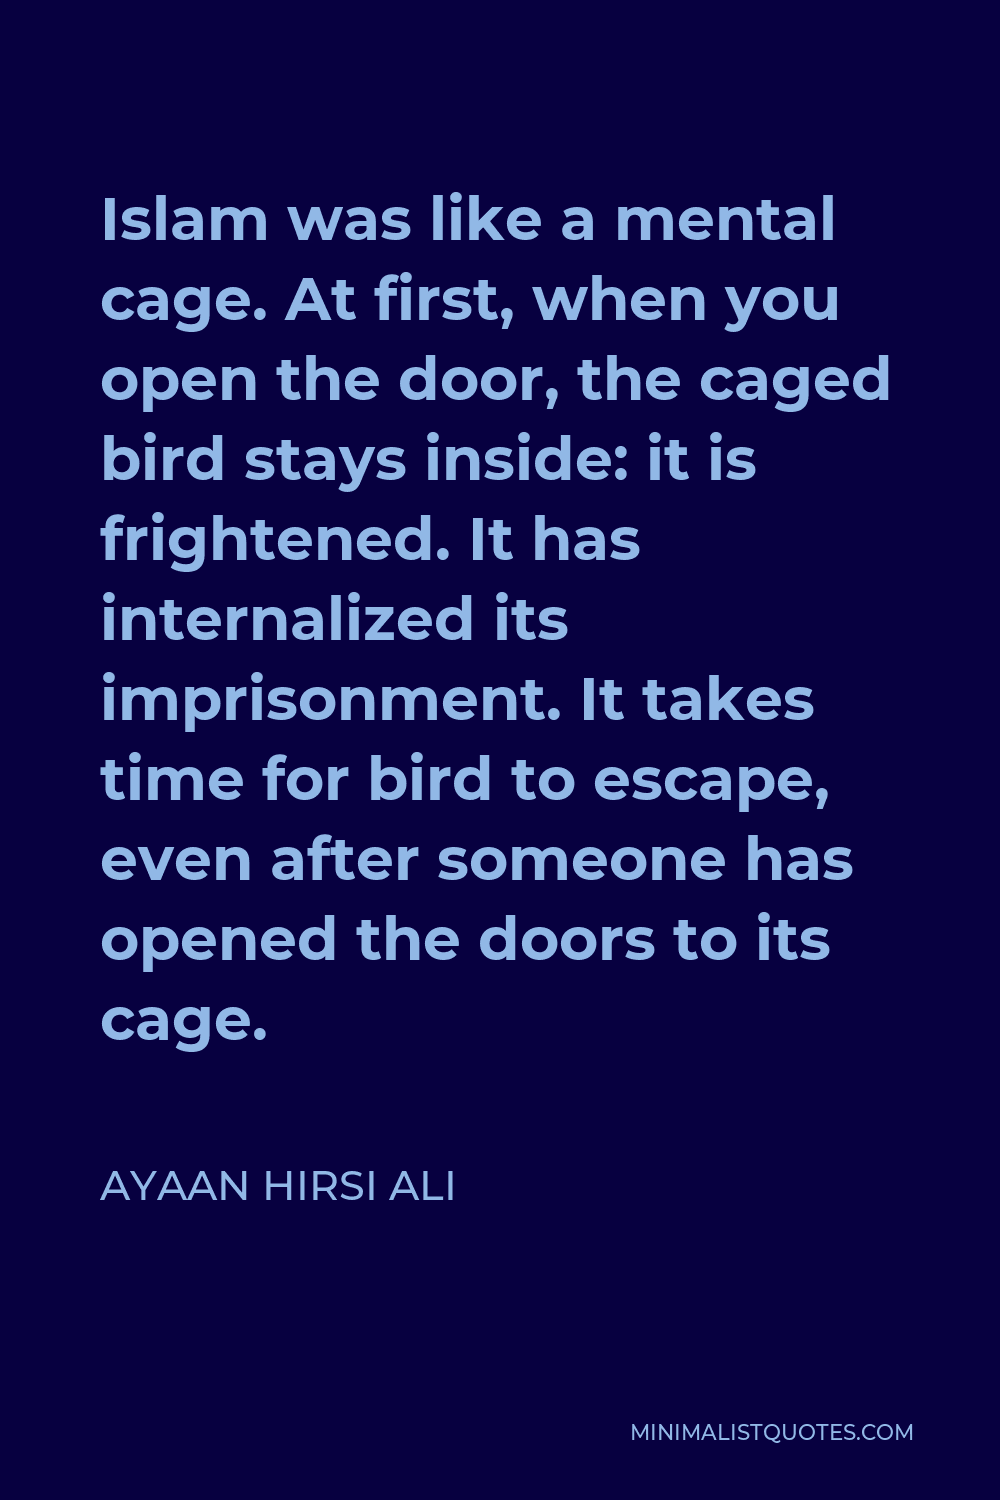 Ayaan Hirsi Ali Quote - Islam was like a mental cage. At first, when you open the door, the caged bird stays inside: it is frightened. It has internalized its imprisonment. It takes time for bird to escape, even after someone has opened the doors to its cage.